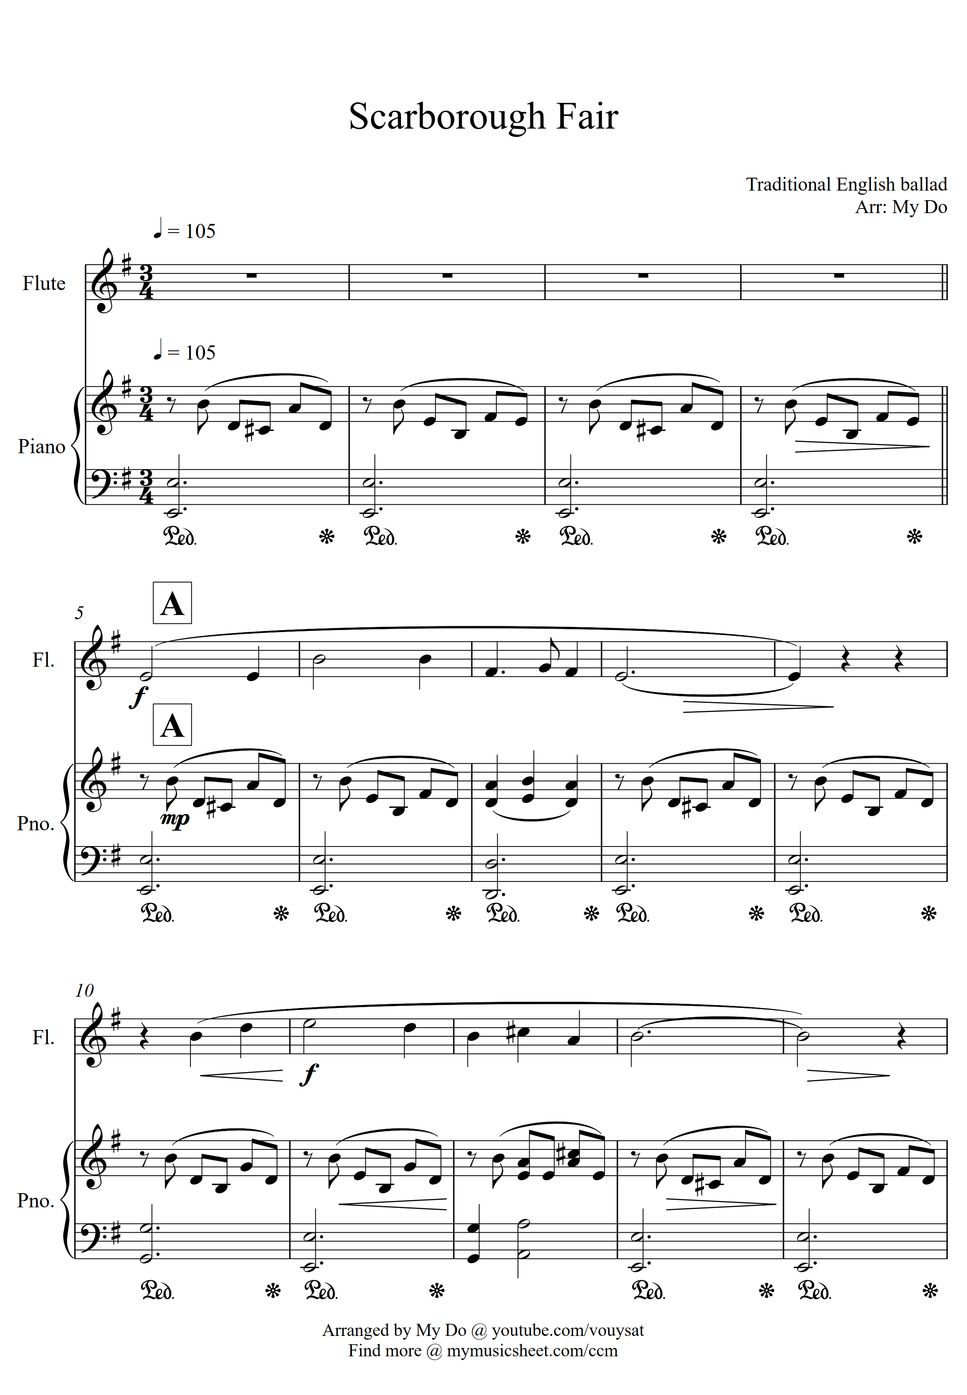 Scarborough Fair for Flute solo (easy) with Piano Accompaniment by My Do